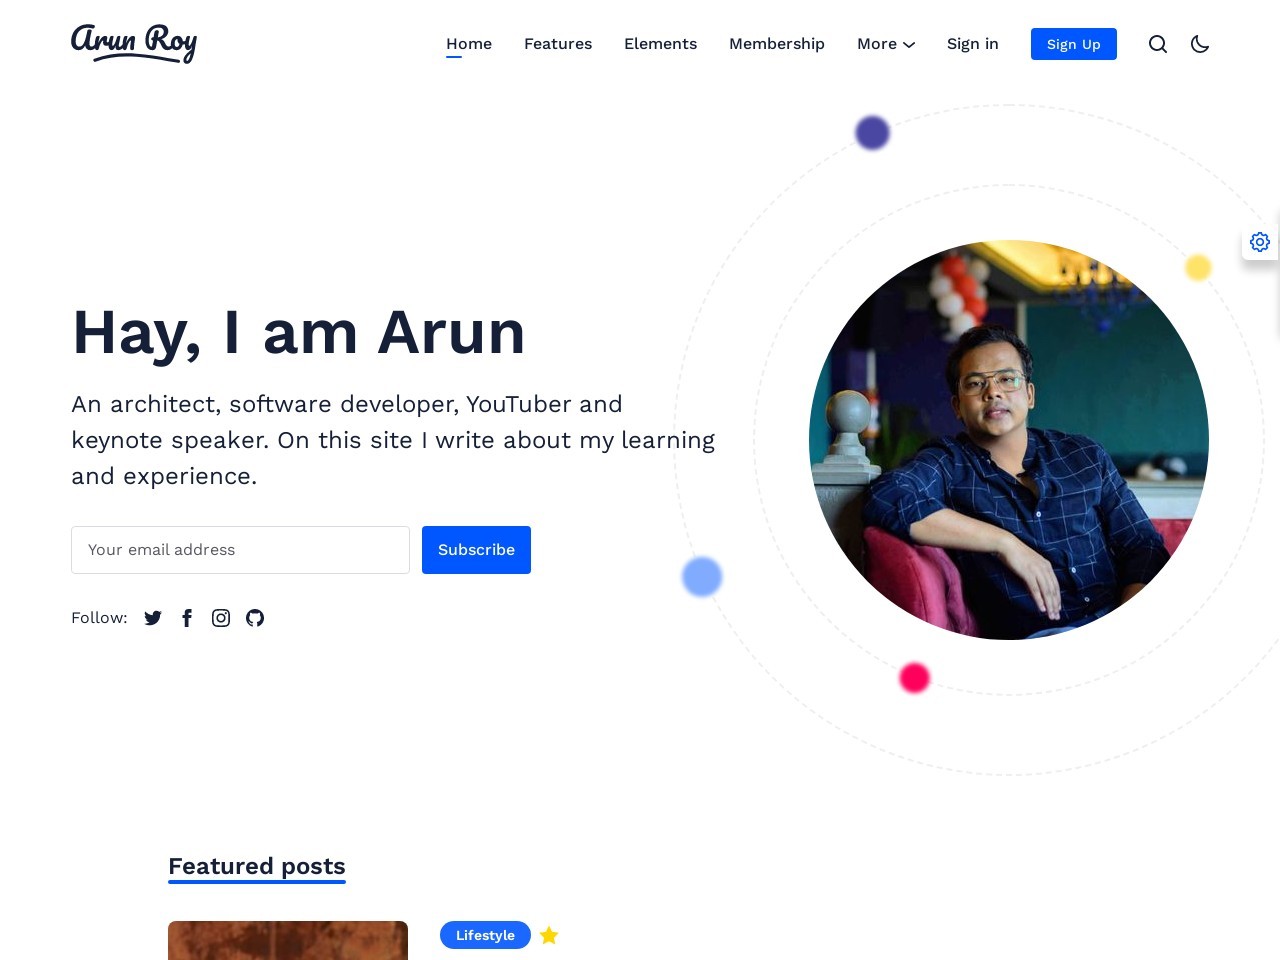 Arun - Personal Blog And Newsletter Ghost Theme